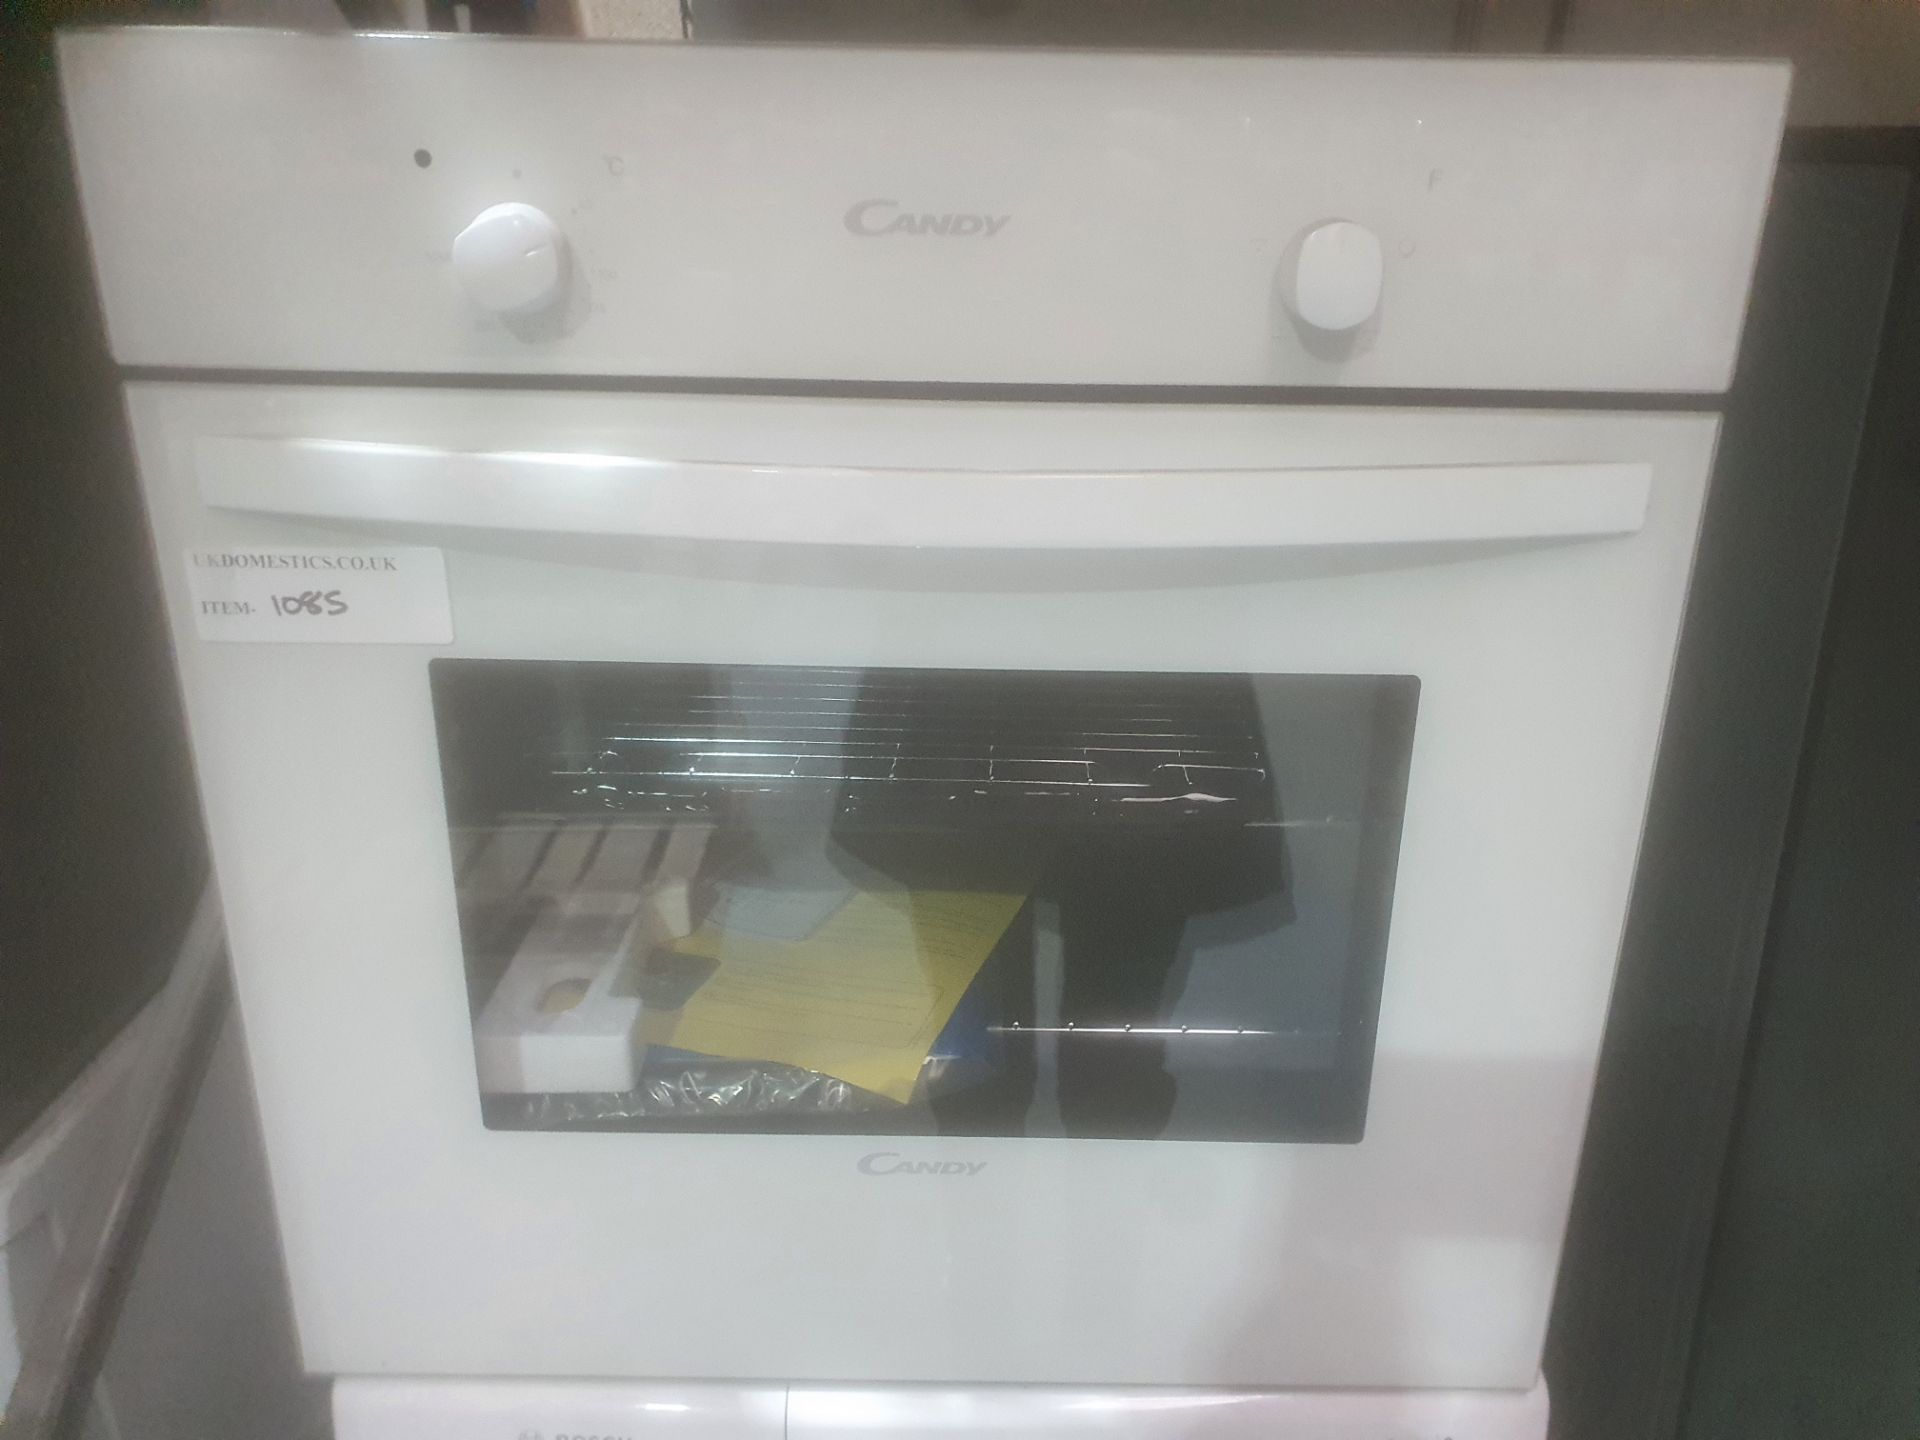 GRADED Candy FST201/6W Plan Light Three Function Electric Built In Single Oven White RRP £229 - Image 2 of 6